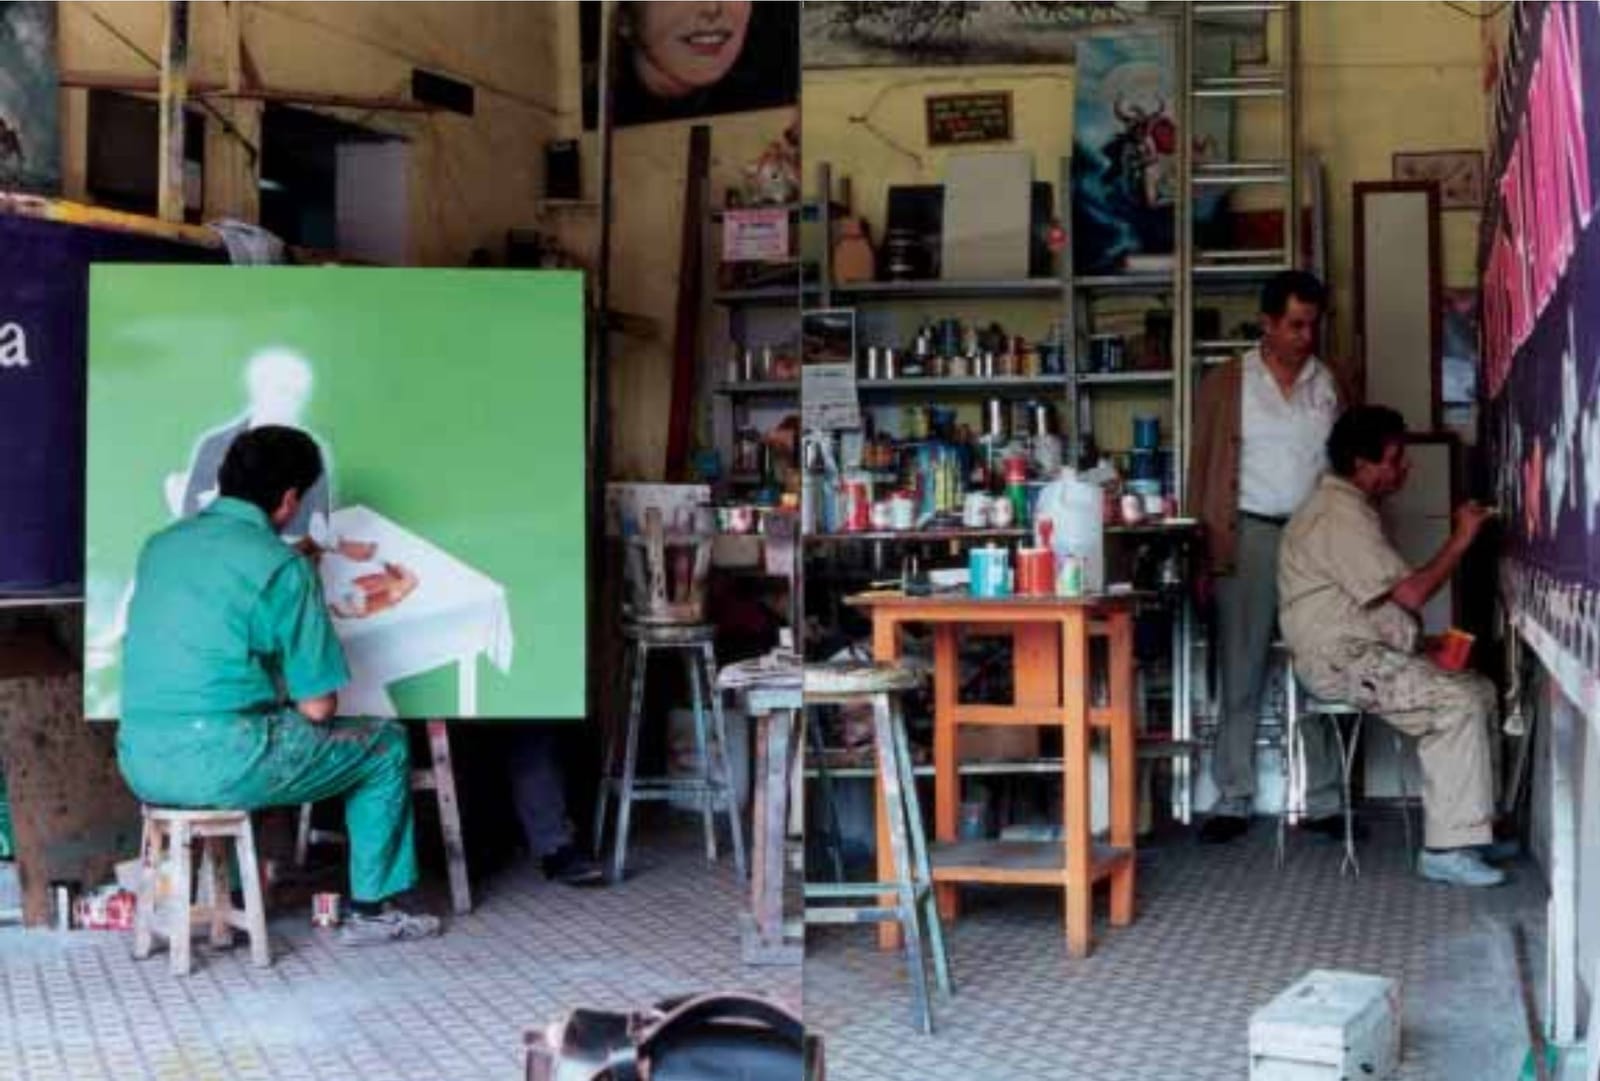 Sign shop/artist studio with men at work on paintings, and various stools, tables, and shelves storing materials.